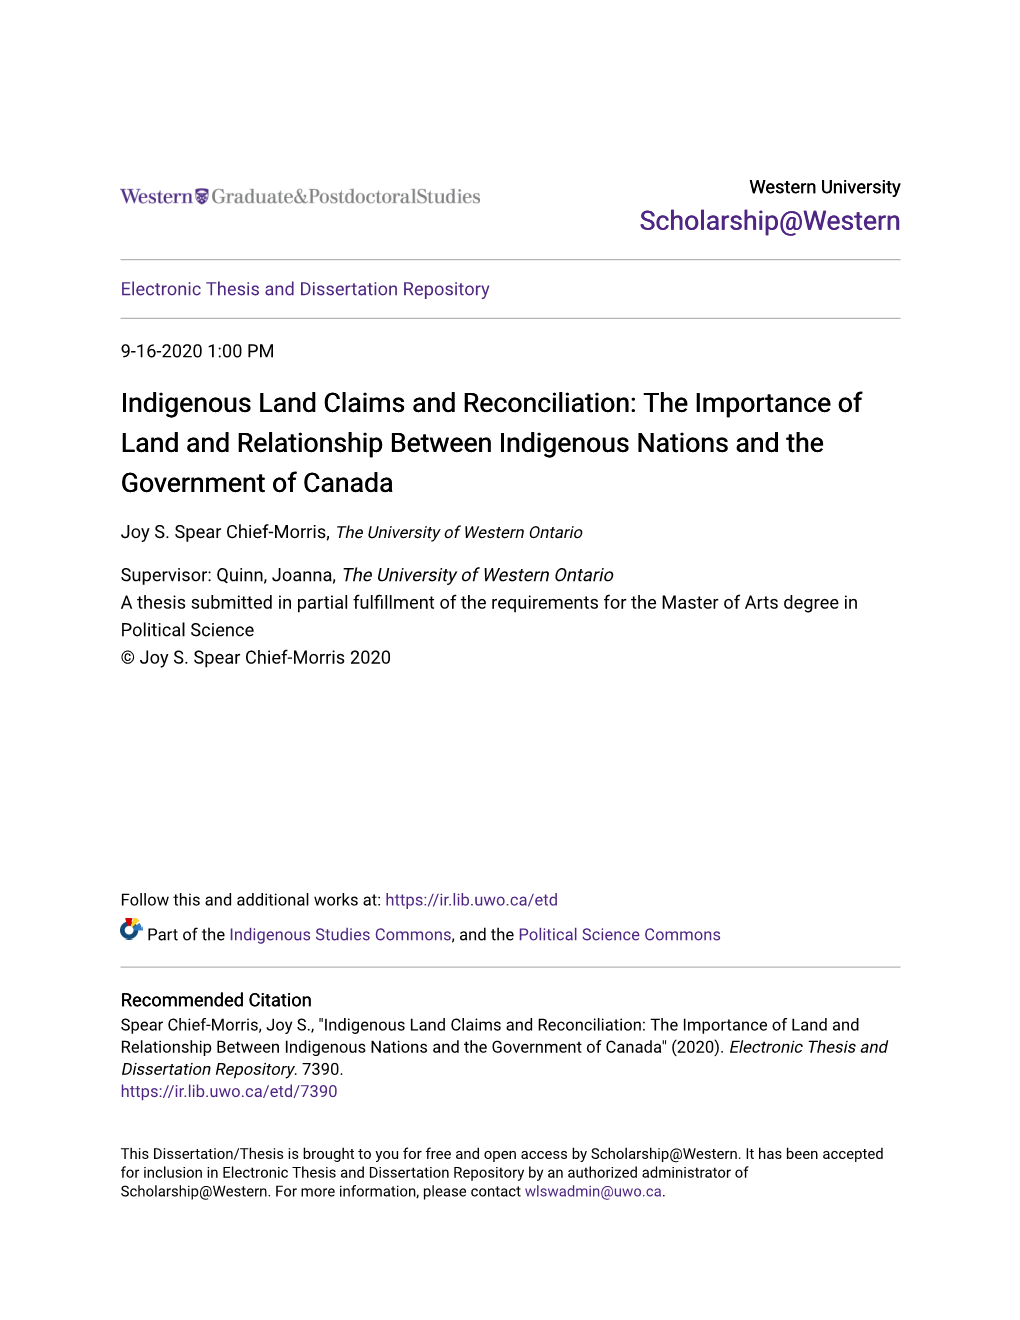 Indigenous Land Claims and Reconciliation: the Importance of Land and Relationship Between Indigenous Nations and the Government of Canada